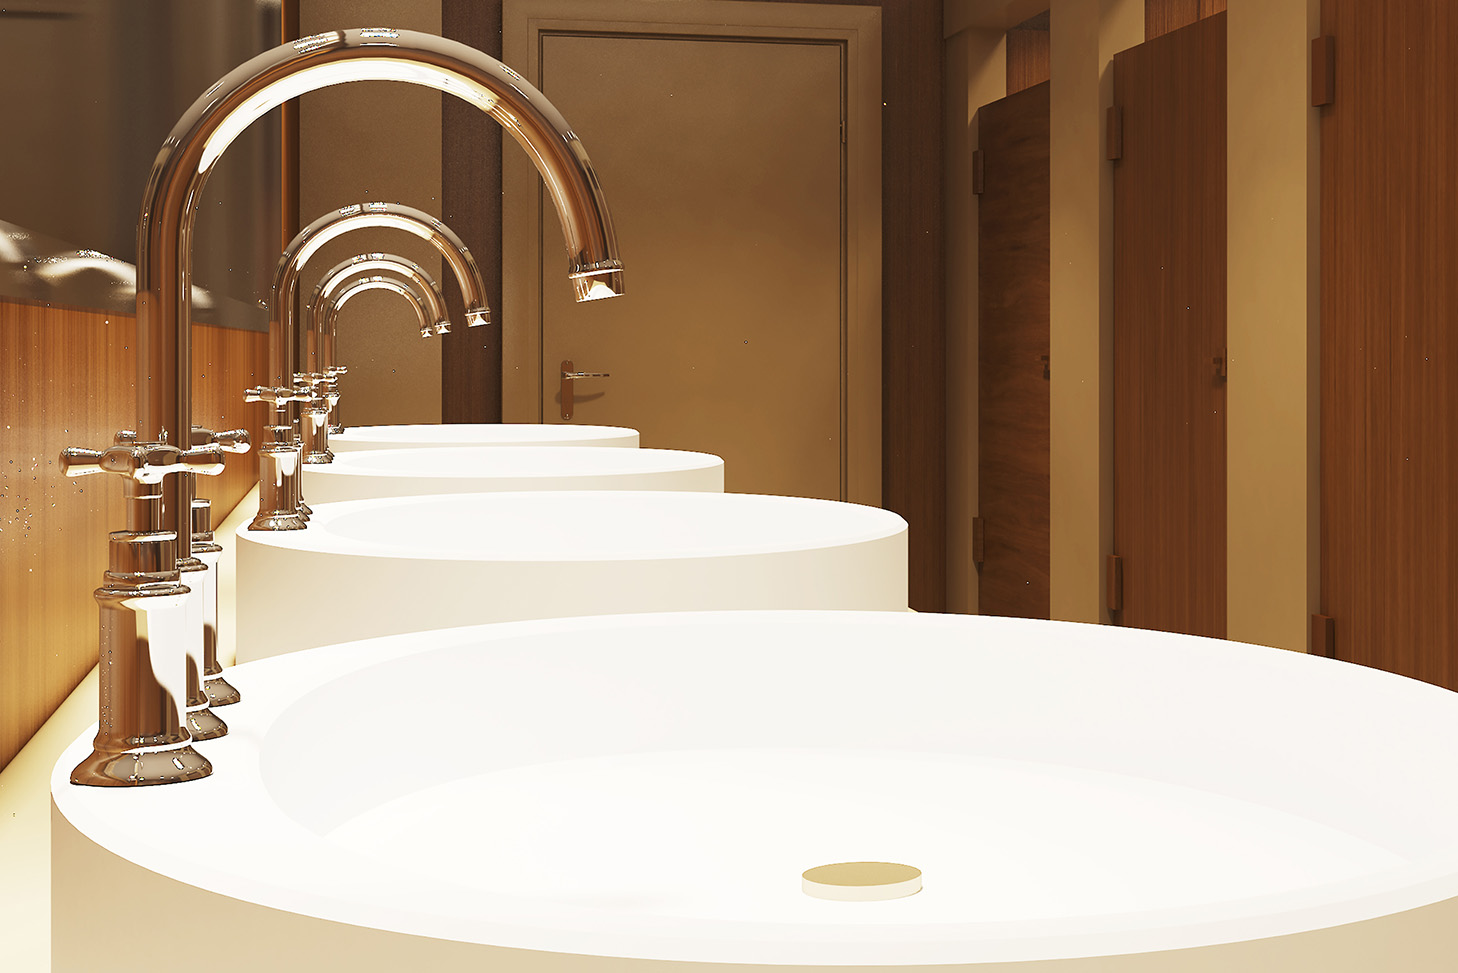 10 Things You Need to Know About Cleaning Commercial Bathrooms